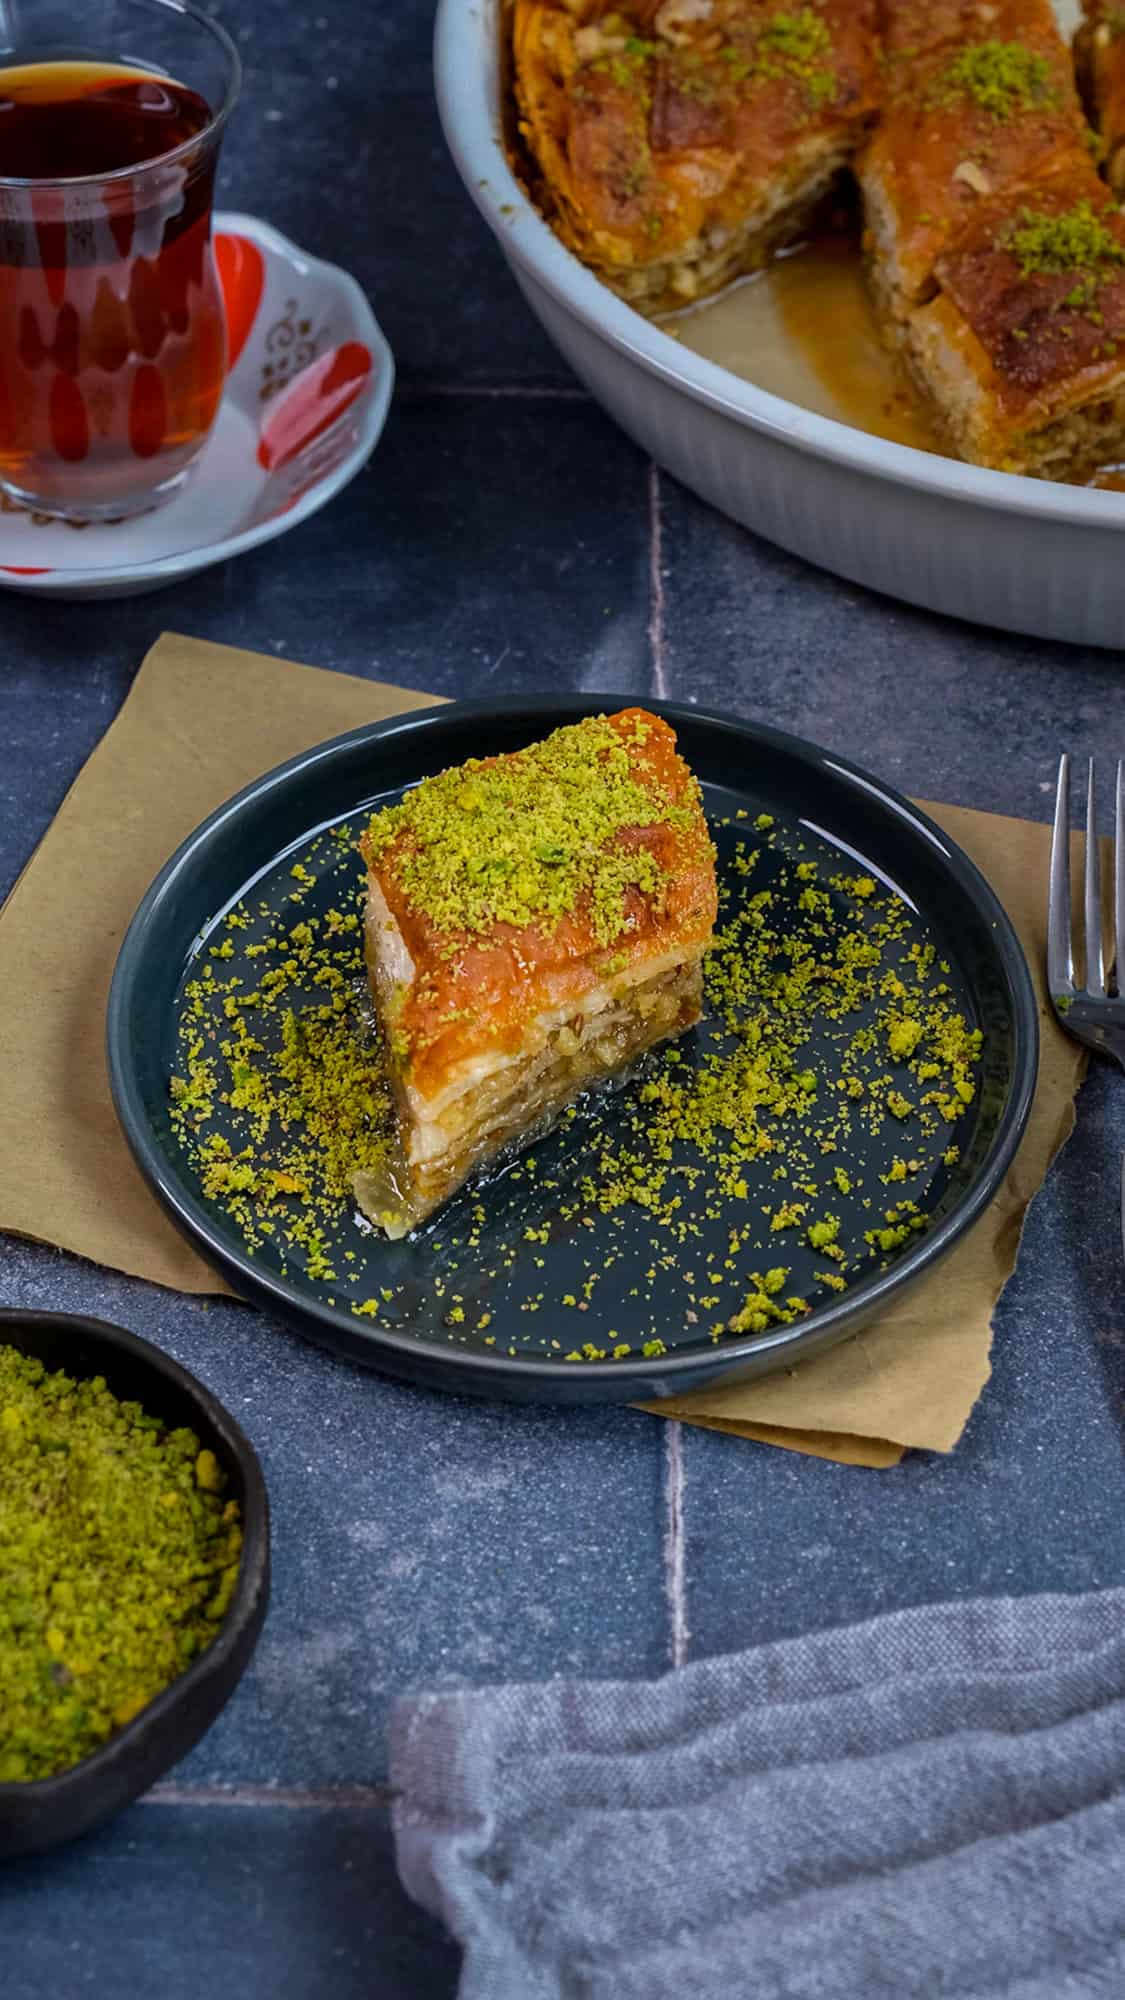 A slice of baklava garnished with ground pistachio served on a dark grey plate, tea in a glass and more baklava in a pan on the side.